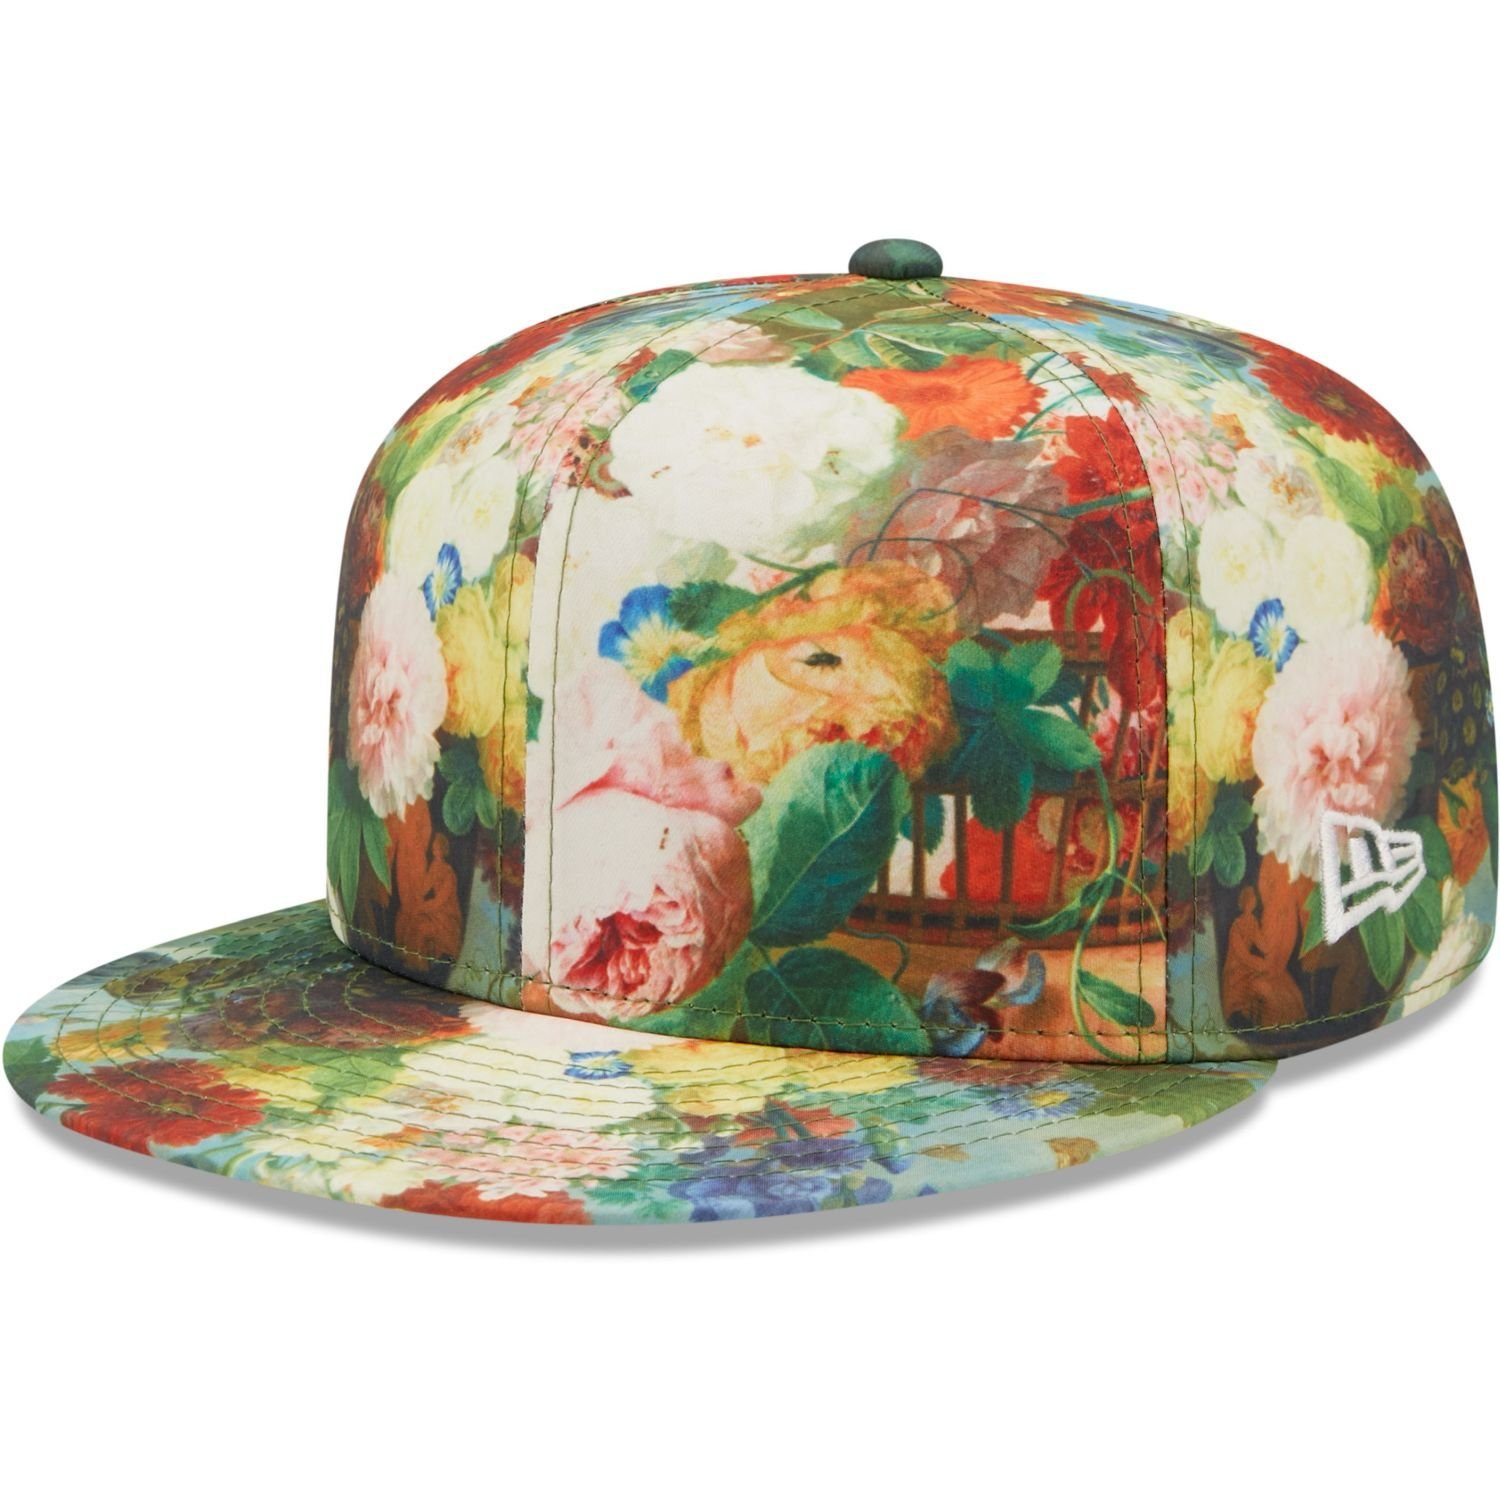 New Era Fitted Cap 59Fifty LE LOUVRE Floral